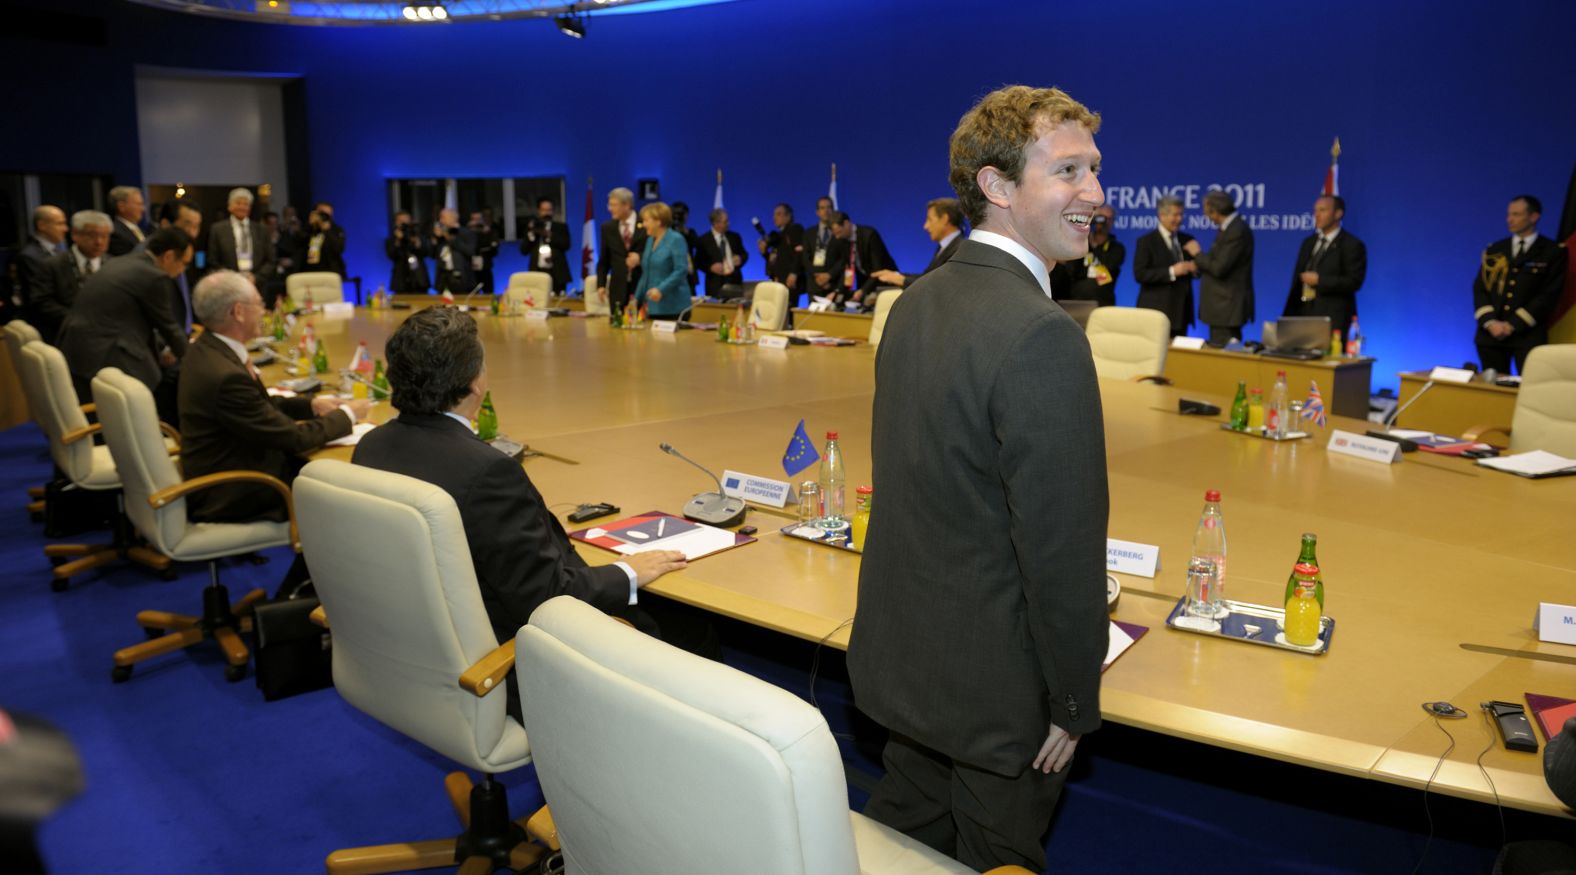 Zuckerberg attends a roundtable session at the G8 Summit in Deauville, France, in May 2011.